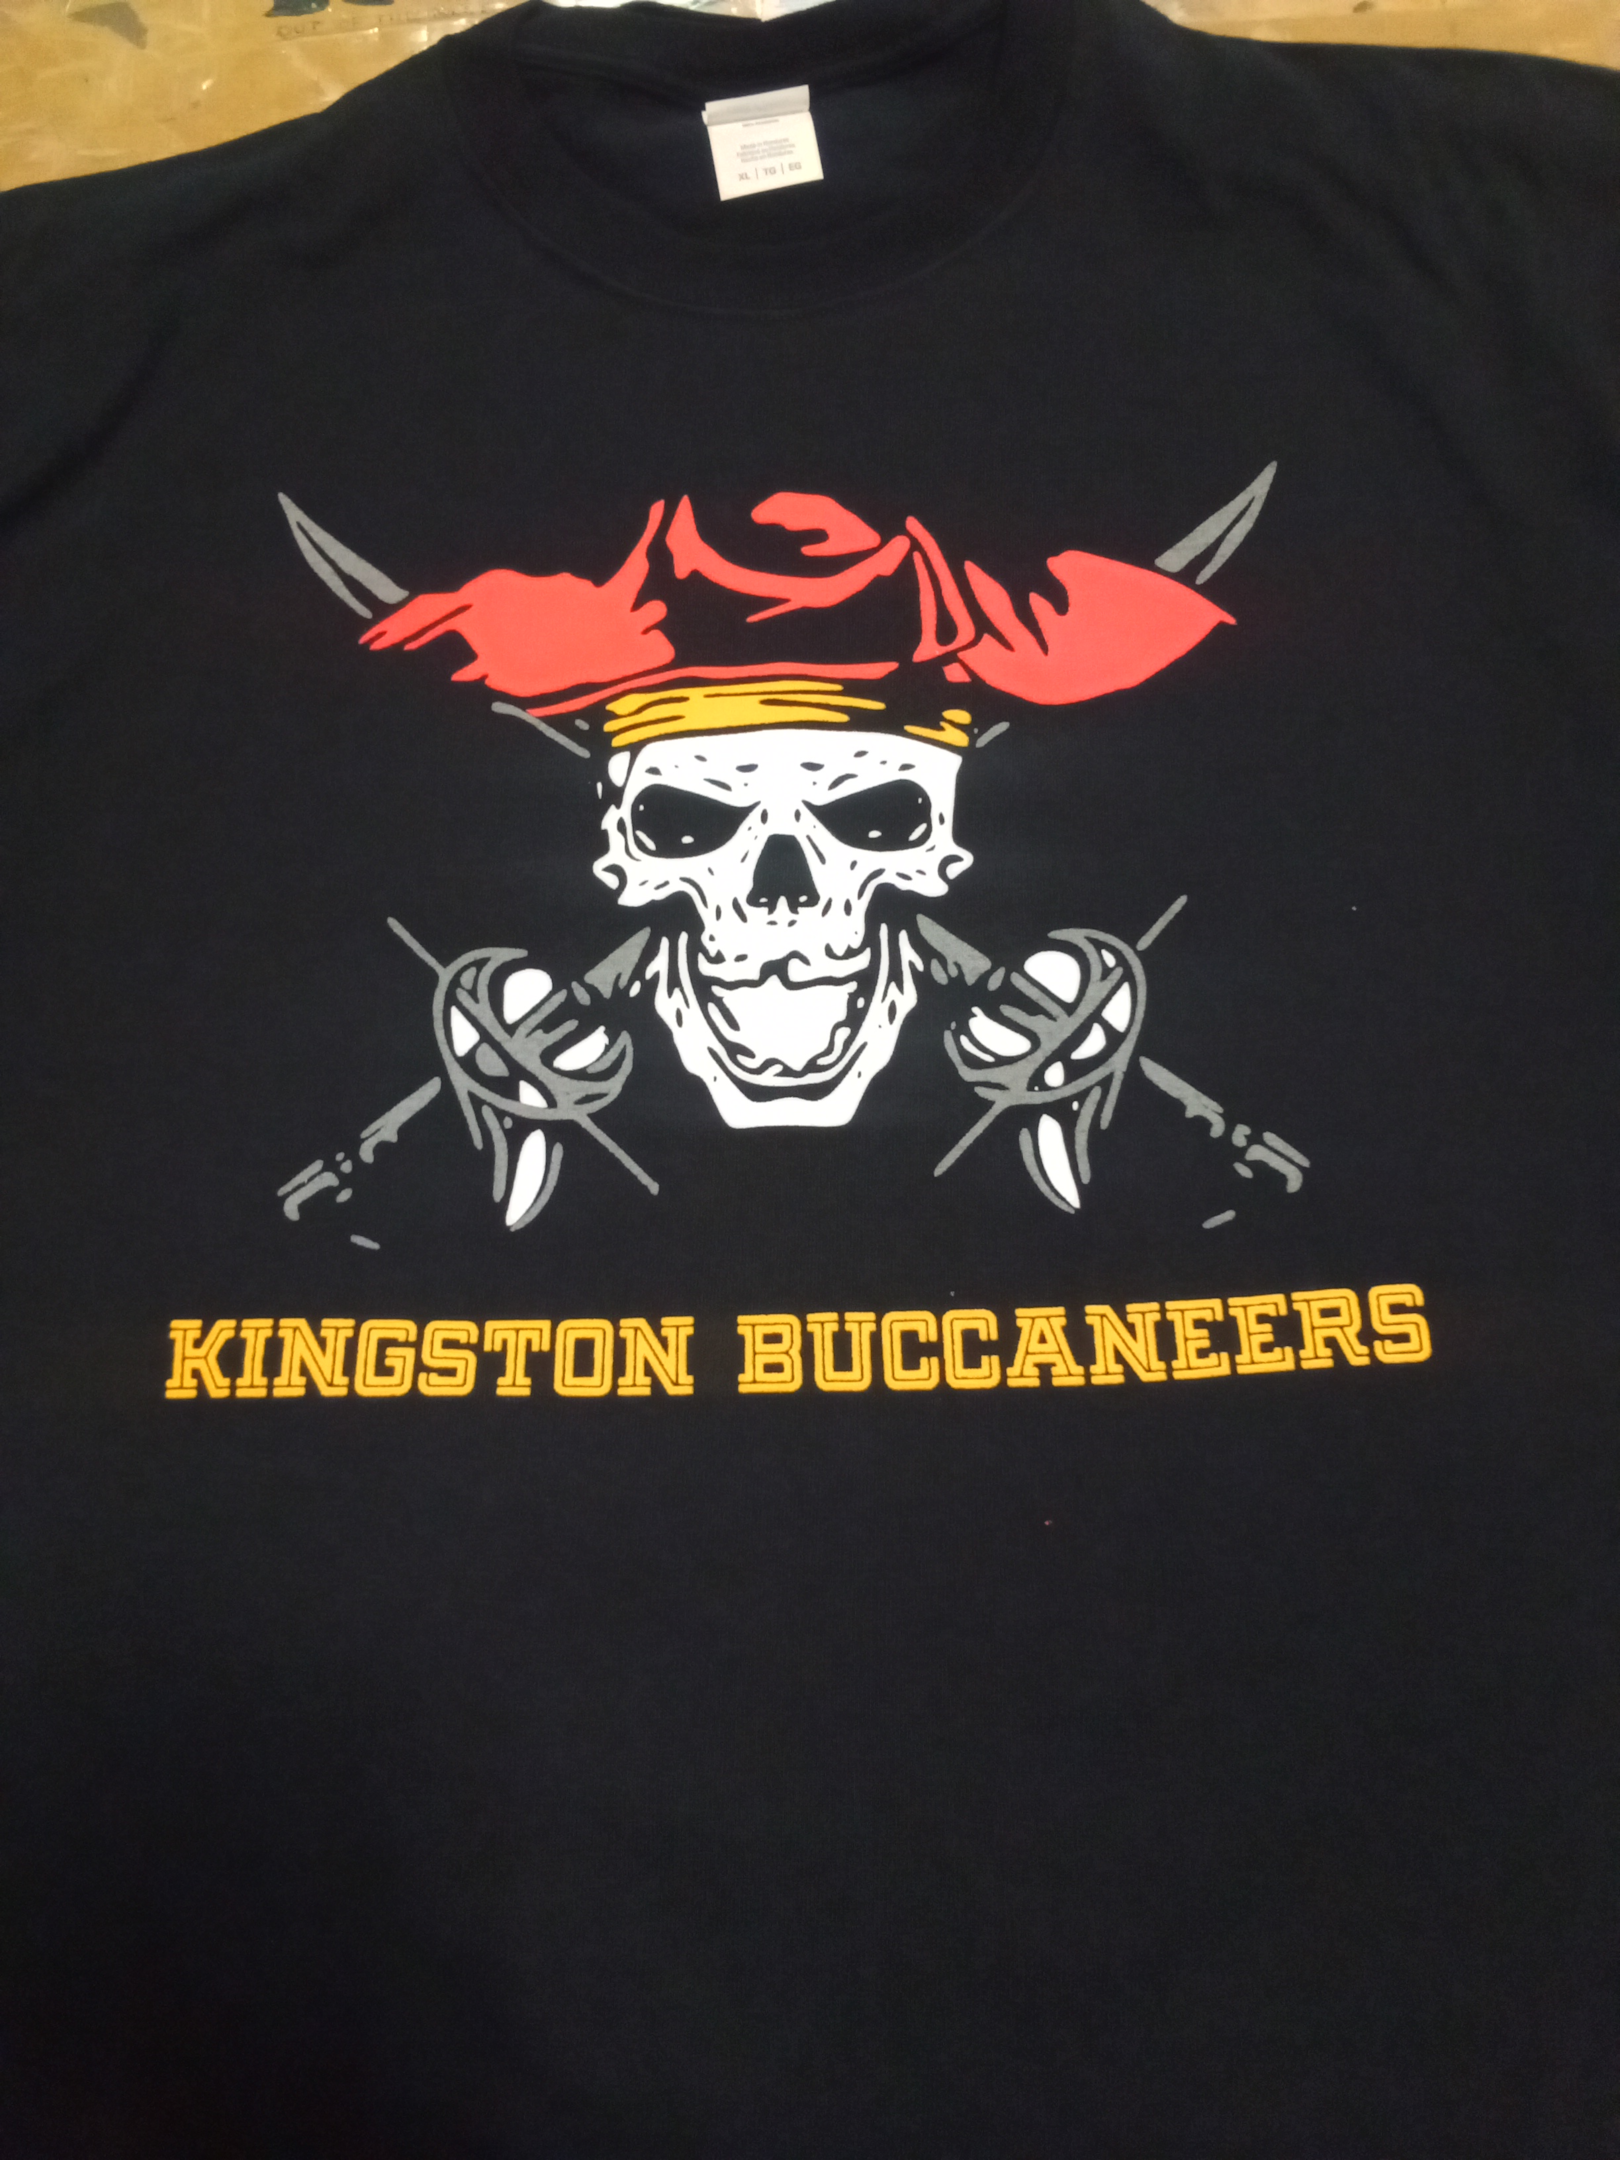 A printed pirate-themed logo on a classic black t-shirt